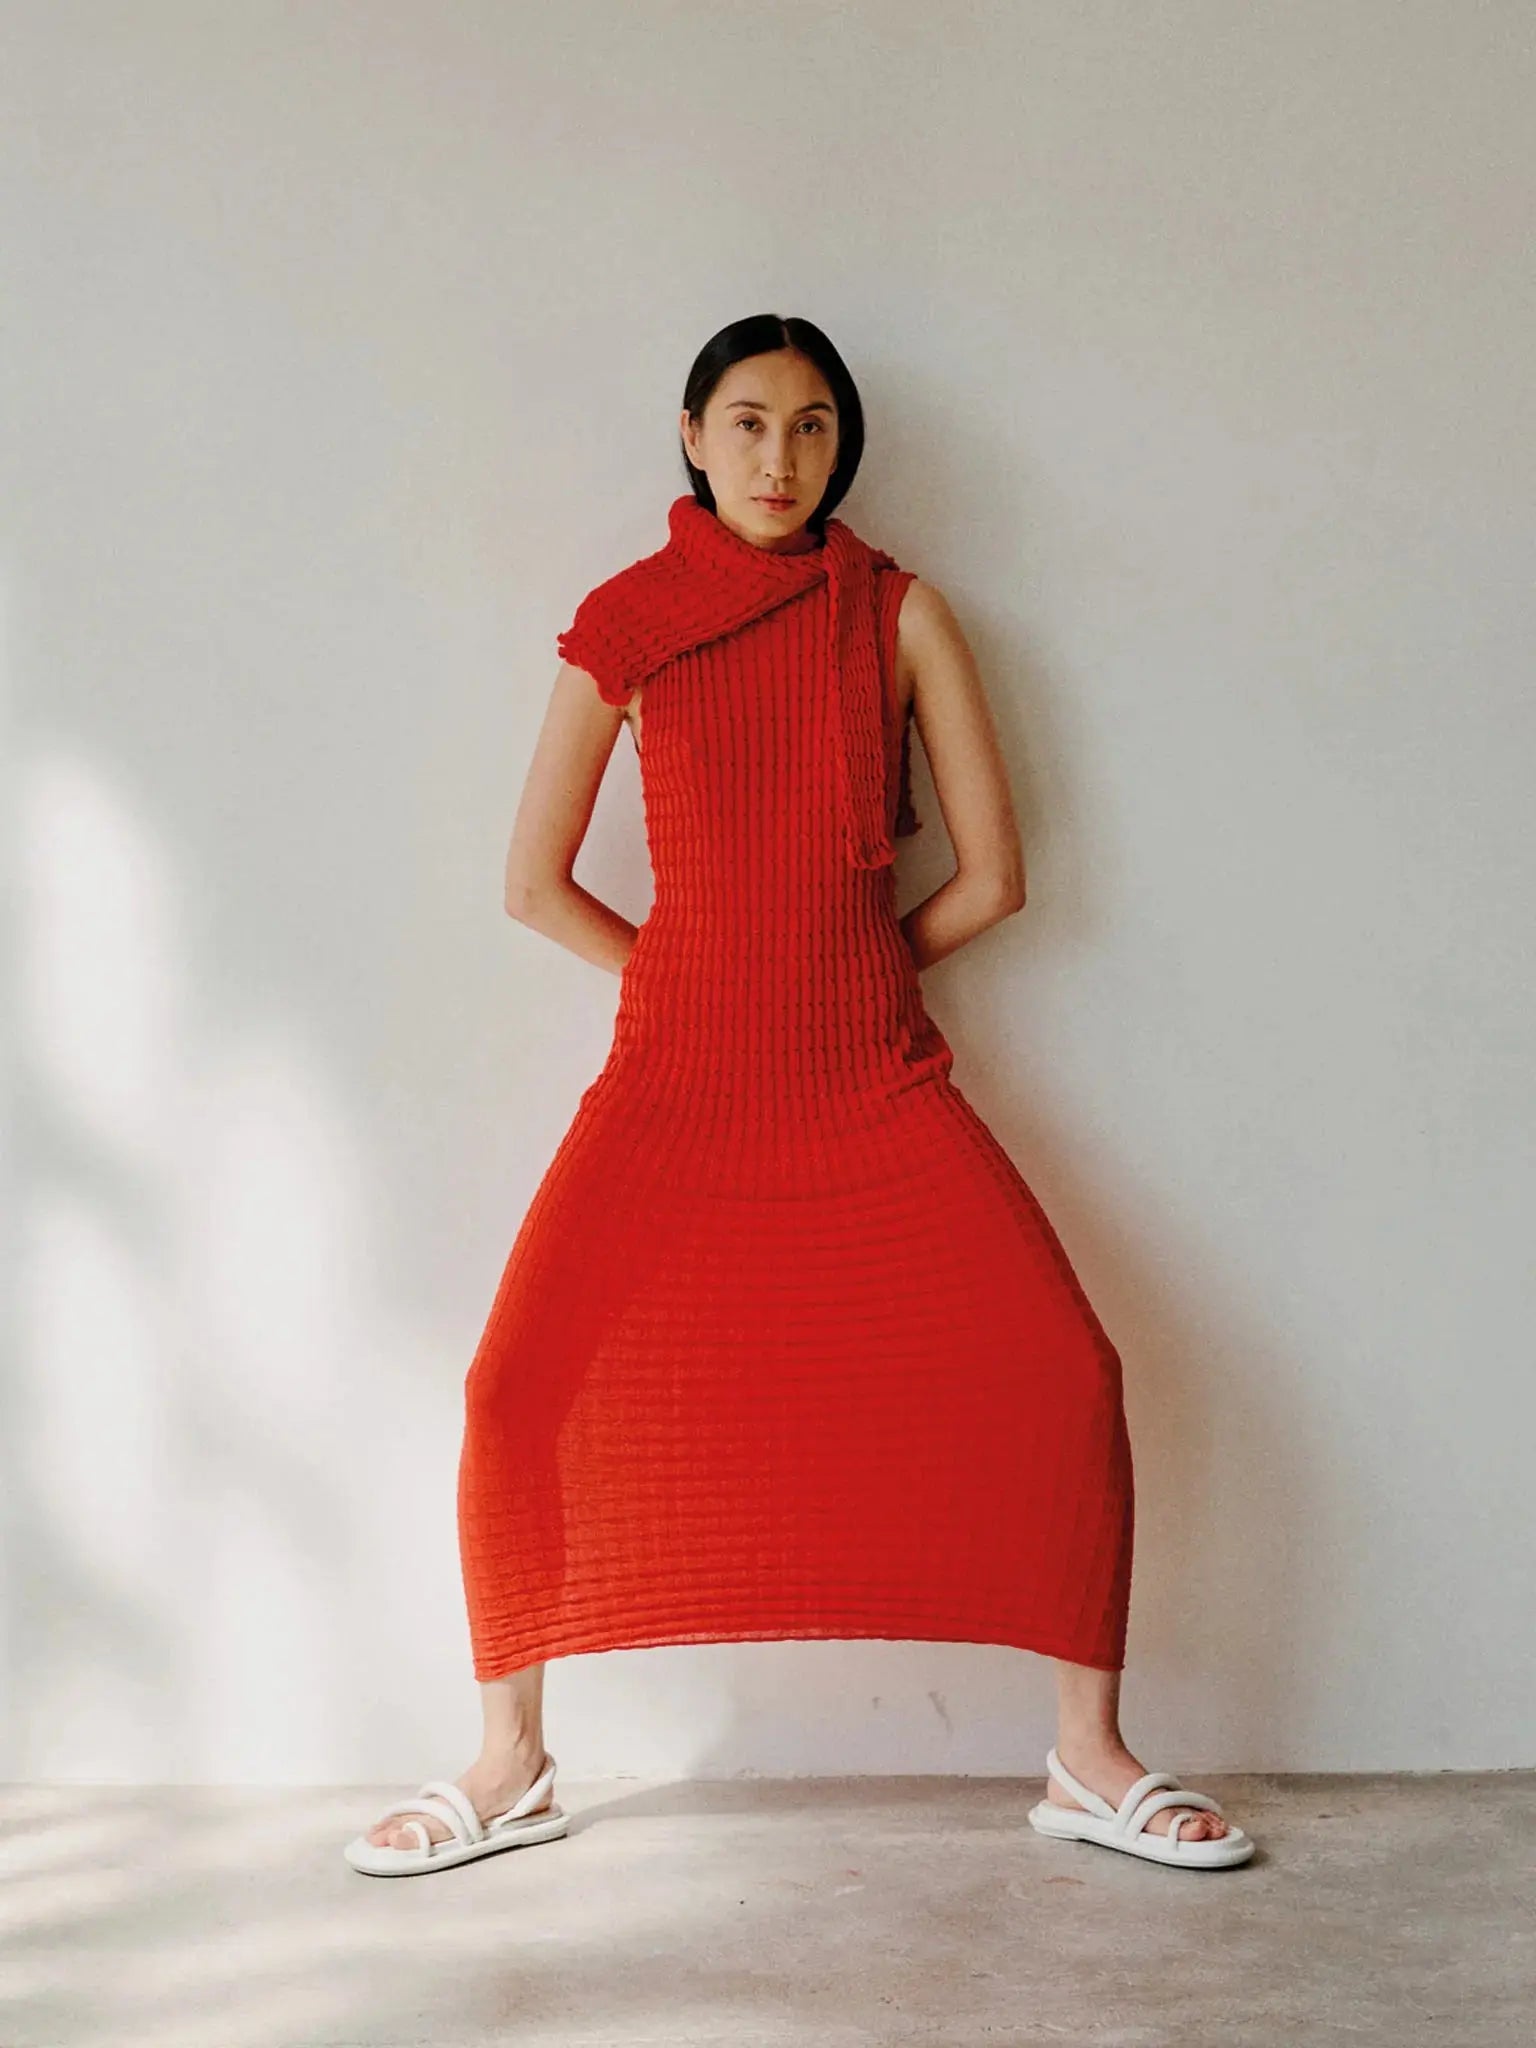 A sleeveless, full-length red dress with a high neckline. The Udon Dress Red by Rus features a textured, ribbed pattern throughout and has a fitted silhouette. The hemline is slightly scalloped, giving a subtle decorative edge to the garment. Find it at Bassalstore in Barcelona for an elegant touch to your wardrobe.